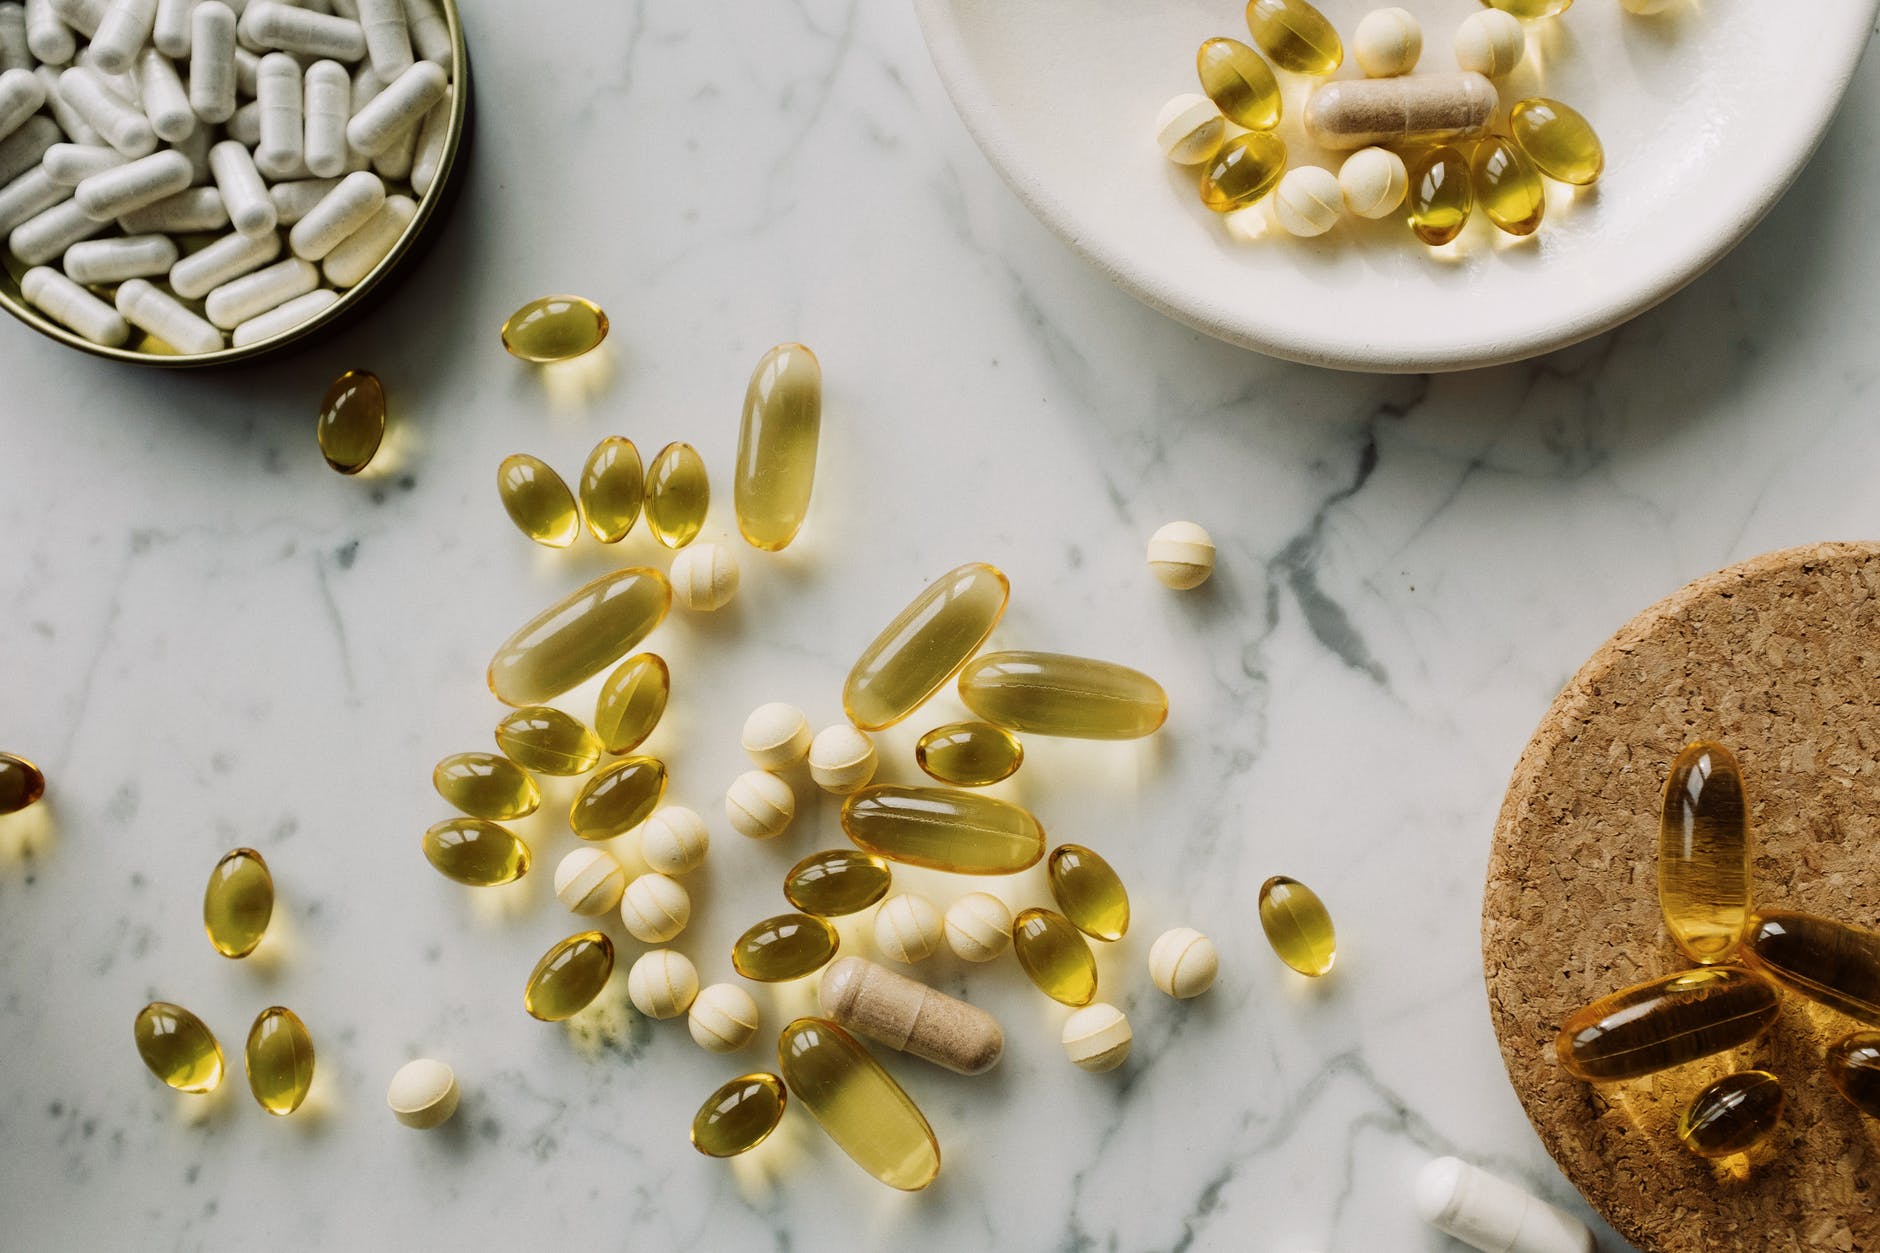 15 Common Foods that are Rich in GABA and Seratonin